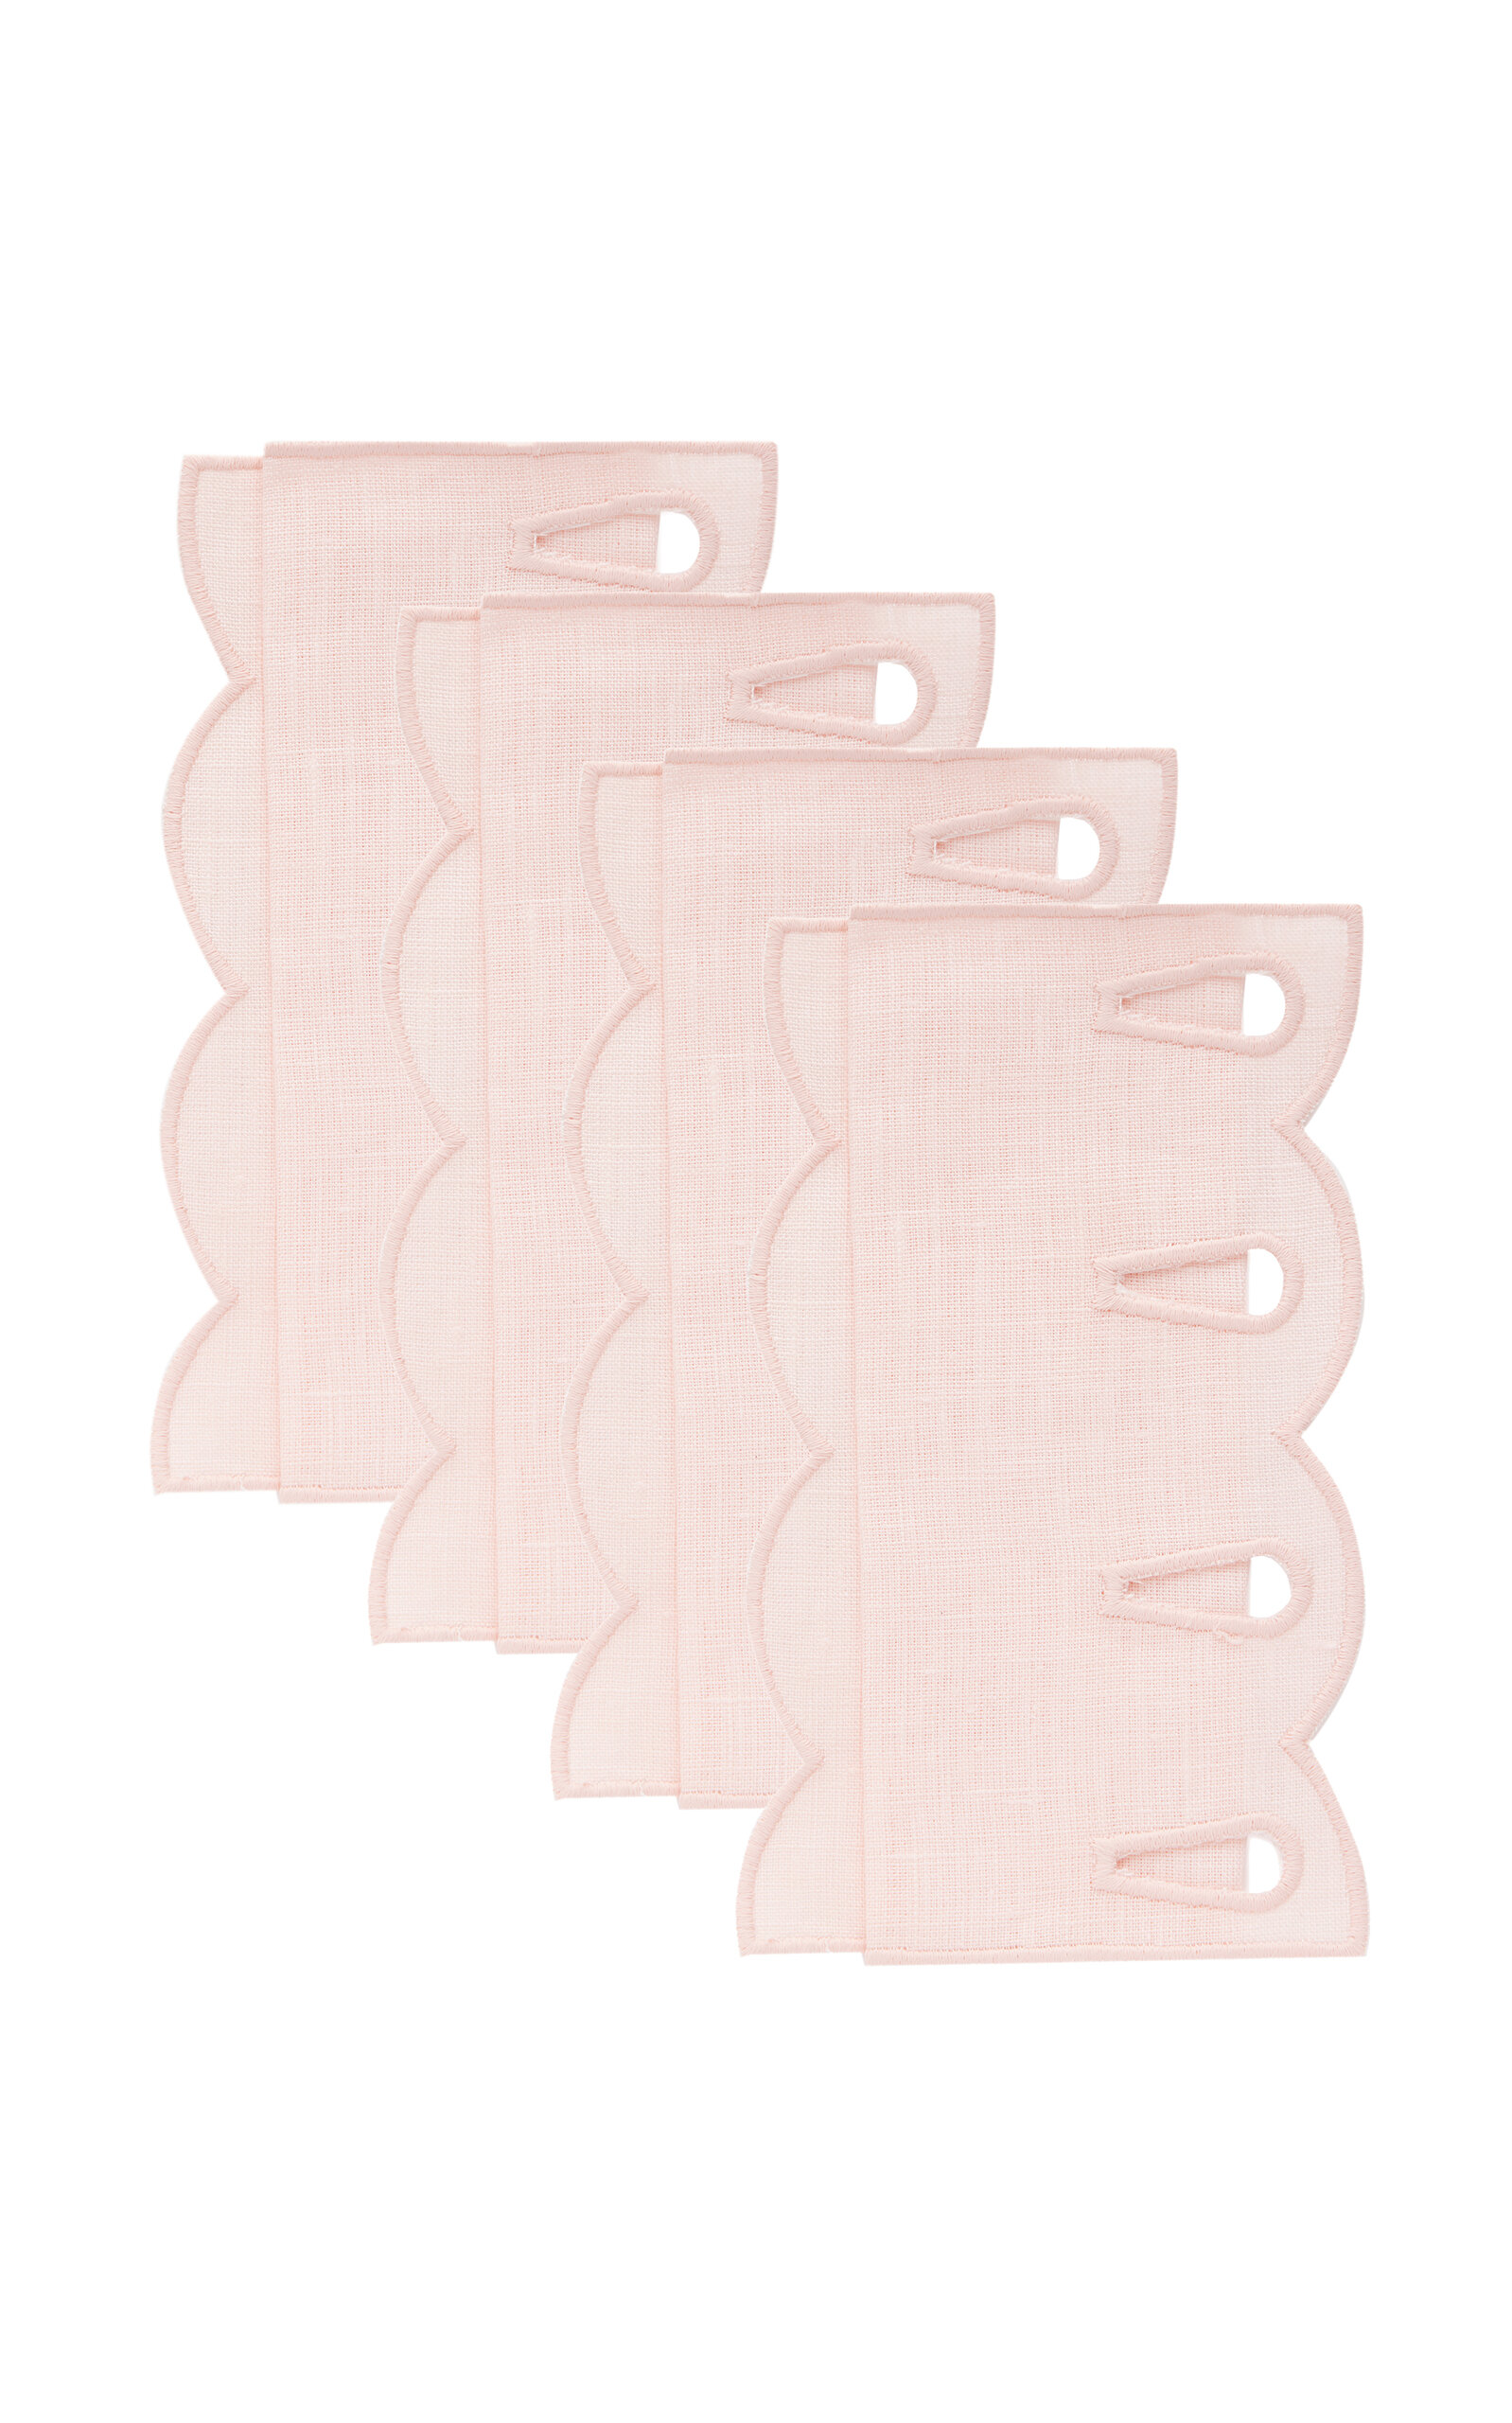 Moda Domus Set-of-four Handcrafted Linen Cocktail Napkins In Pink